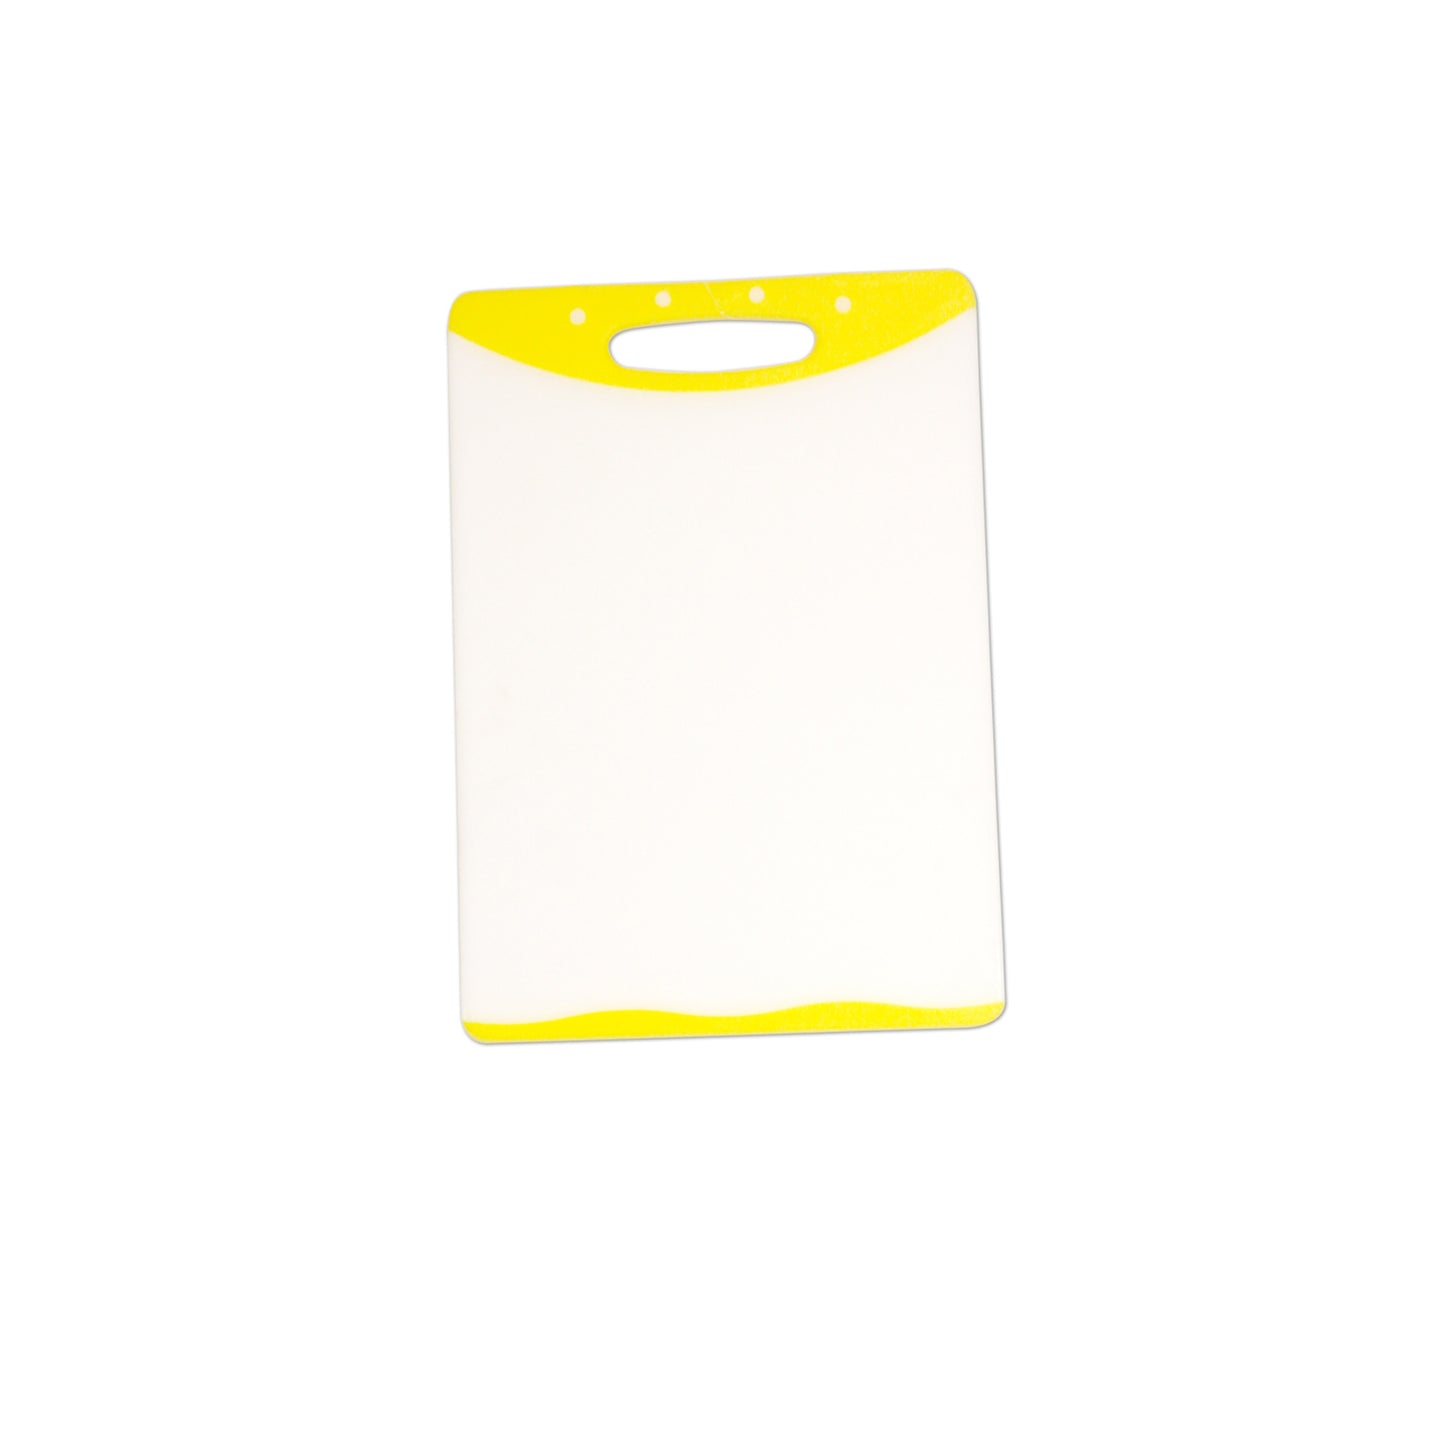 Home Basics 8” x 12” Dual Sided Plastic Cutting Board with Rubberized Non-Slip Edges - Yellow